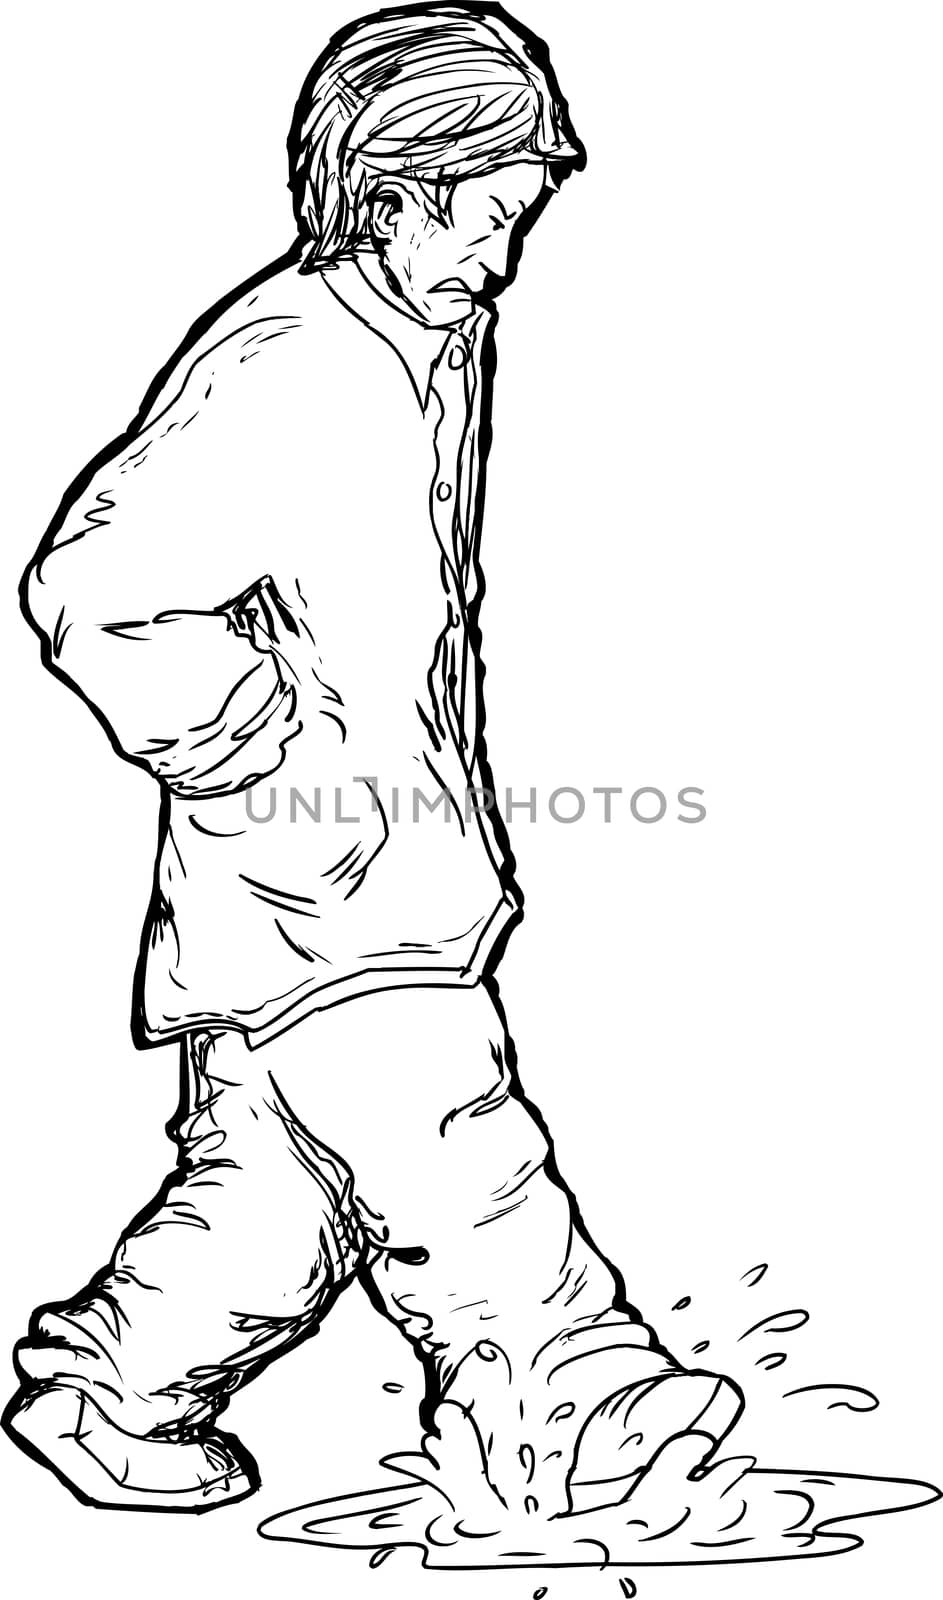 Outline of upset man with hands in pocket stepping in puddle